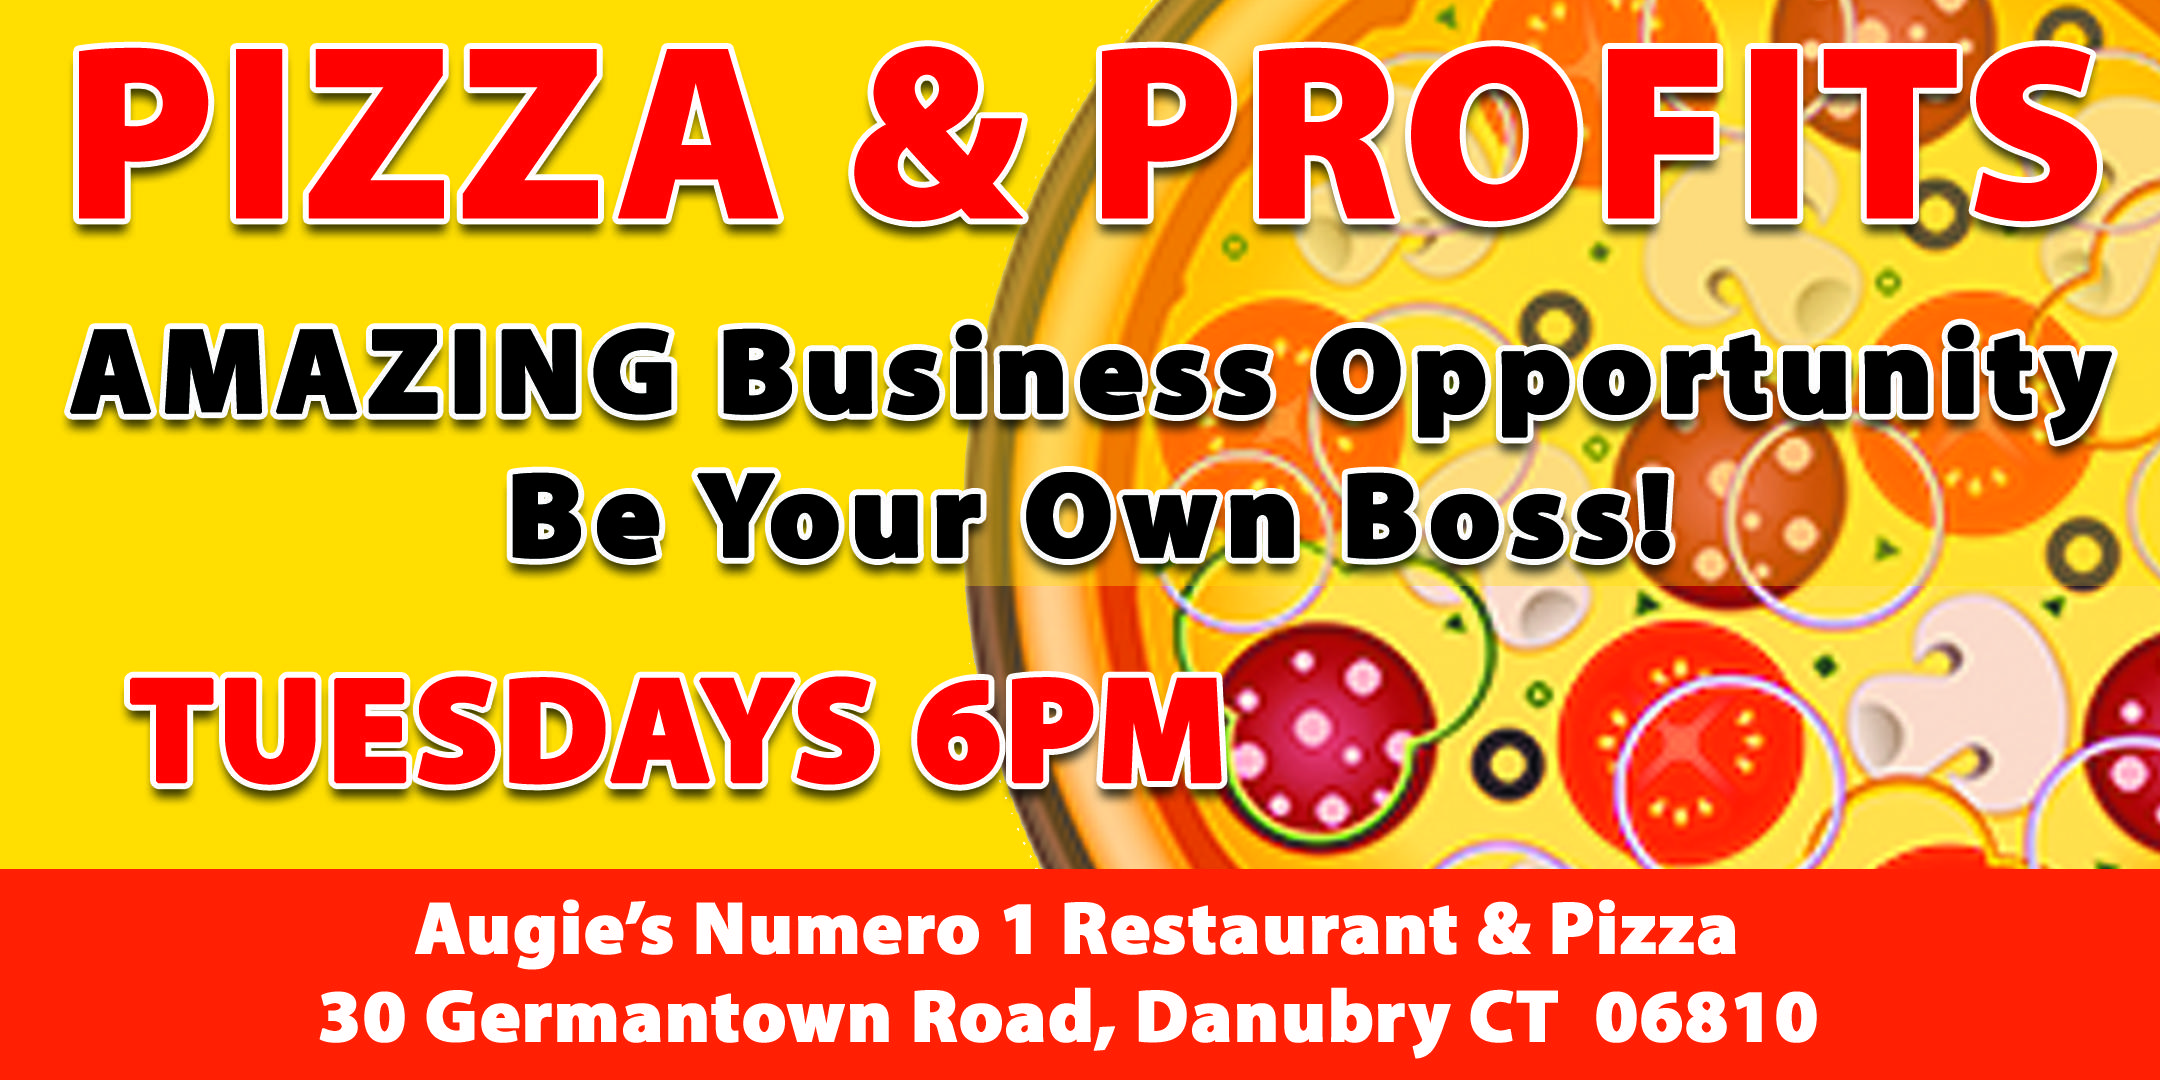 PIZZA & PROFITS - Business Opportunity - Be Your Own Boss! 